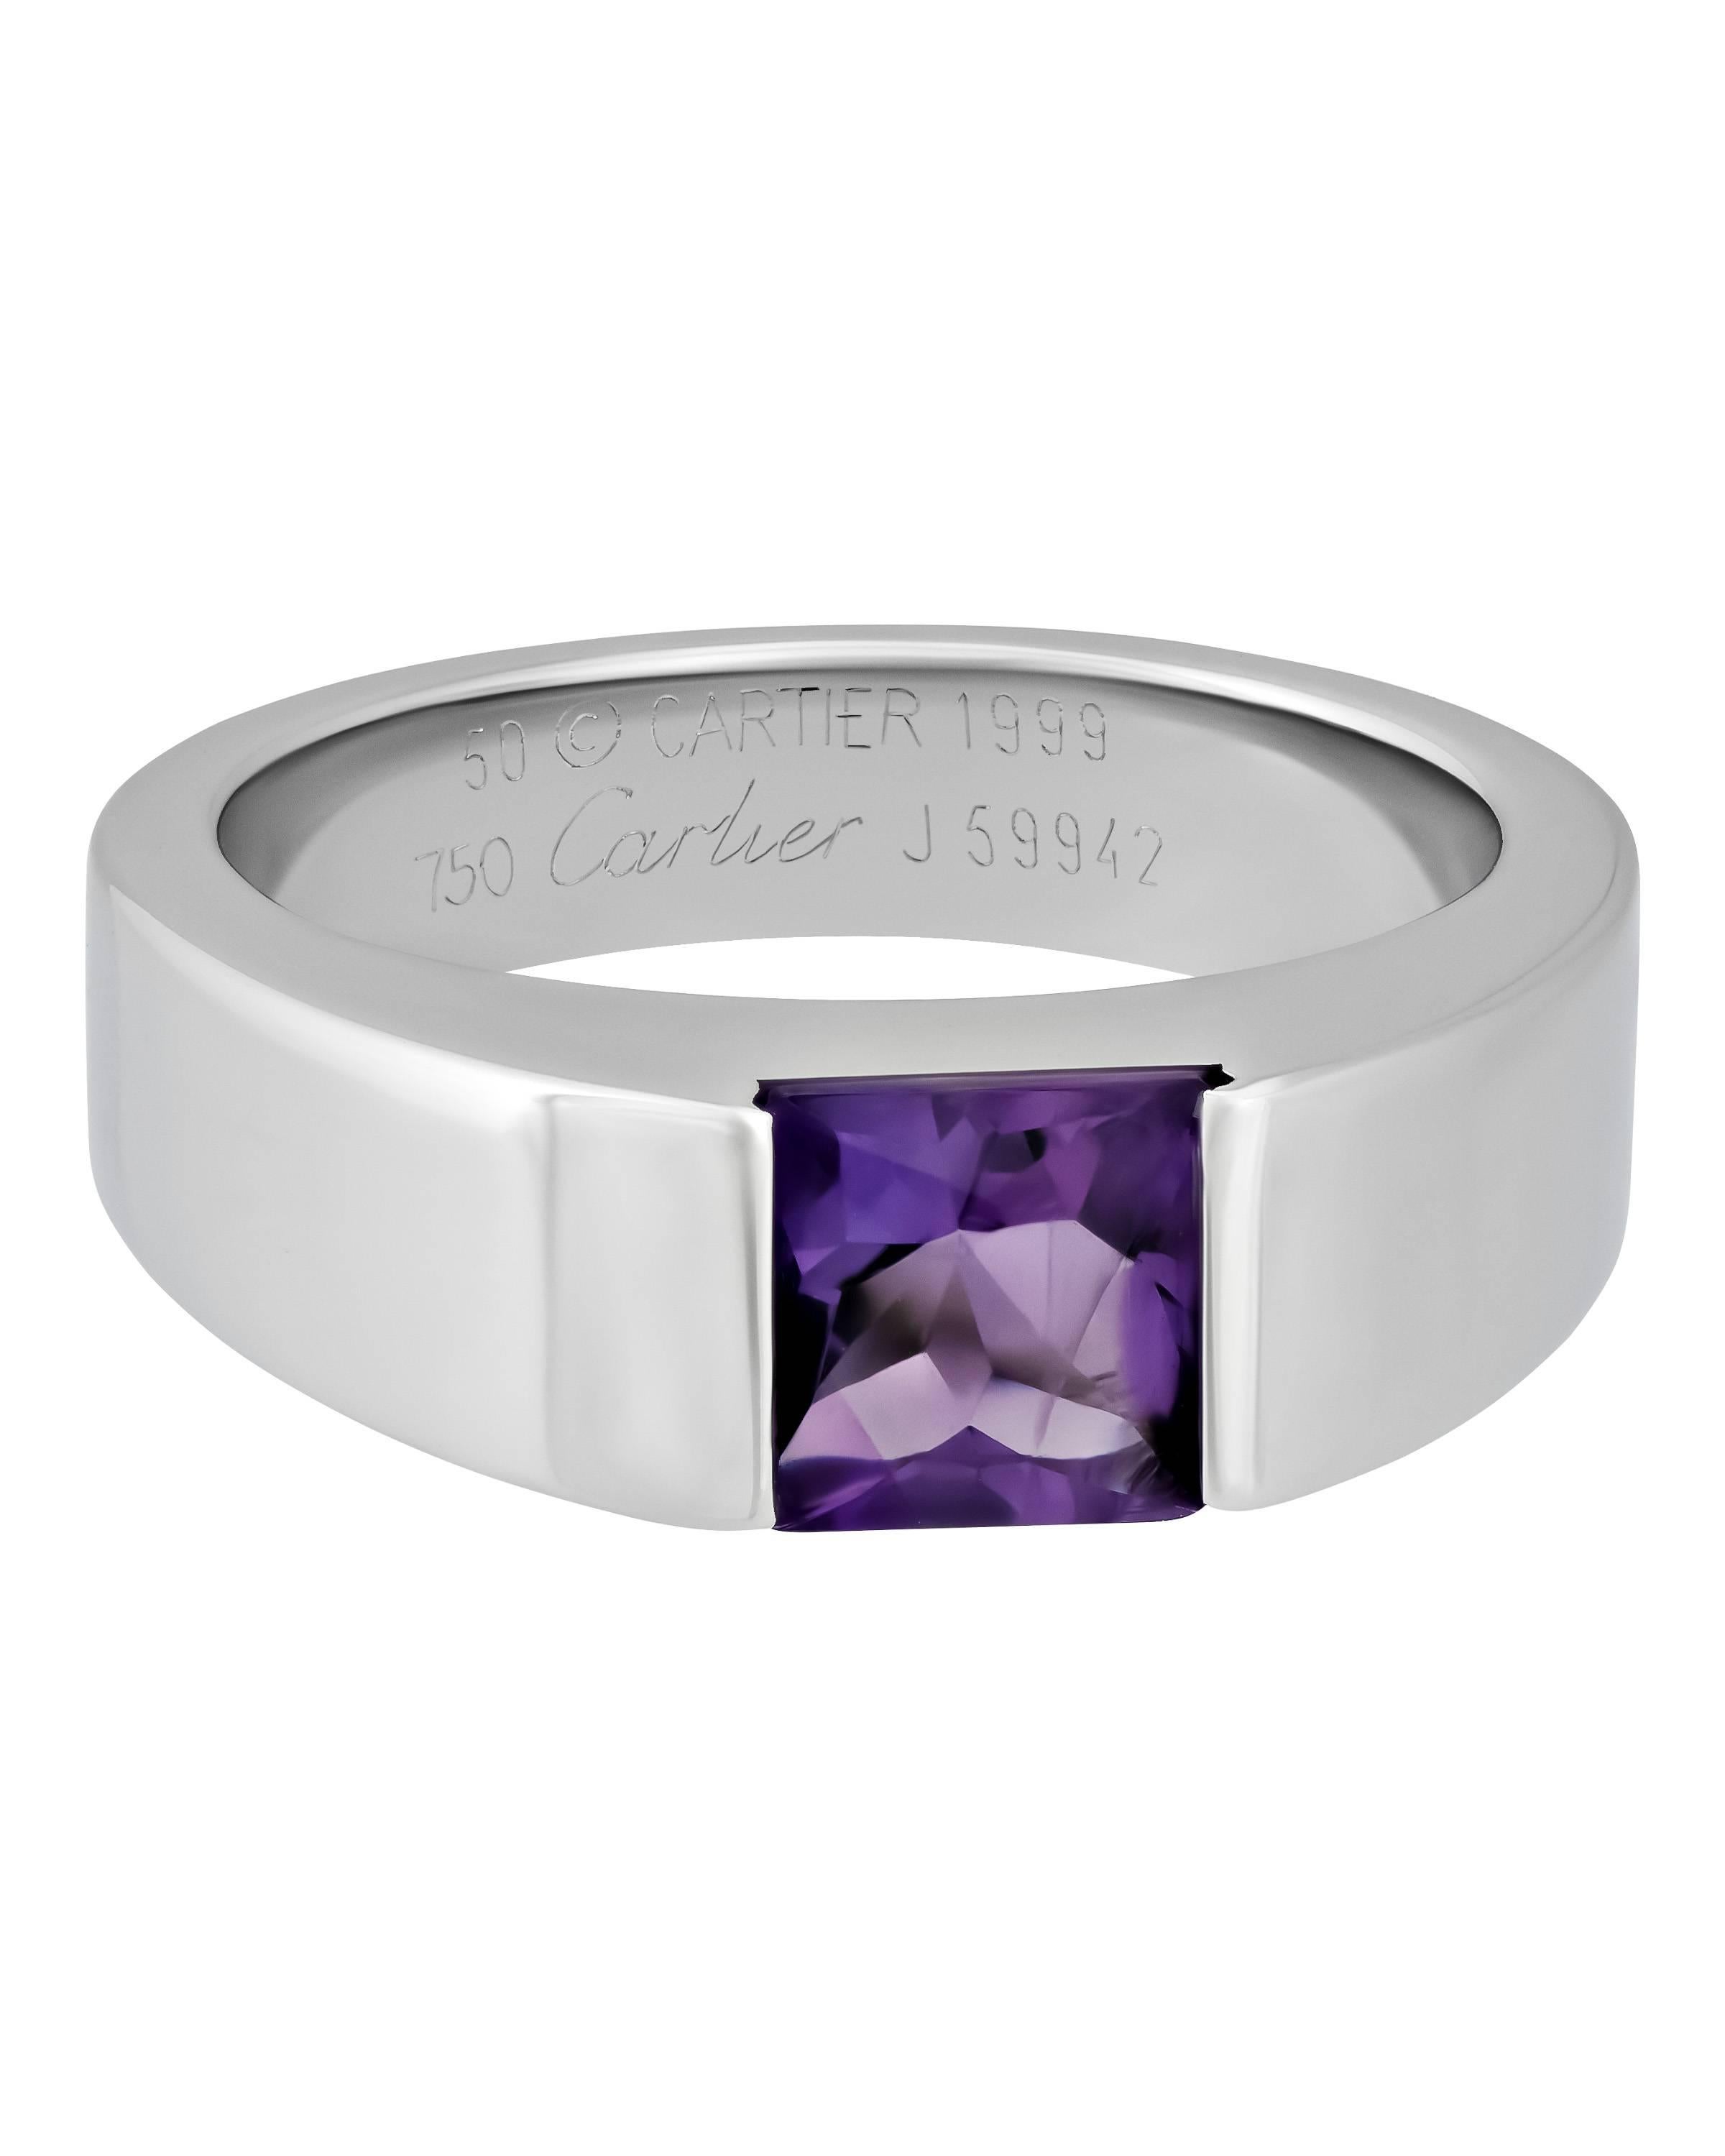 Amethyst is a gem of peace and balance, and this extraordinarily chic ring is certainly enough to inspire serenity.

METAL TYPE: 18K White Gold
TOTAL WEIGHT: 9.8g
RING SIZE: 5.5